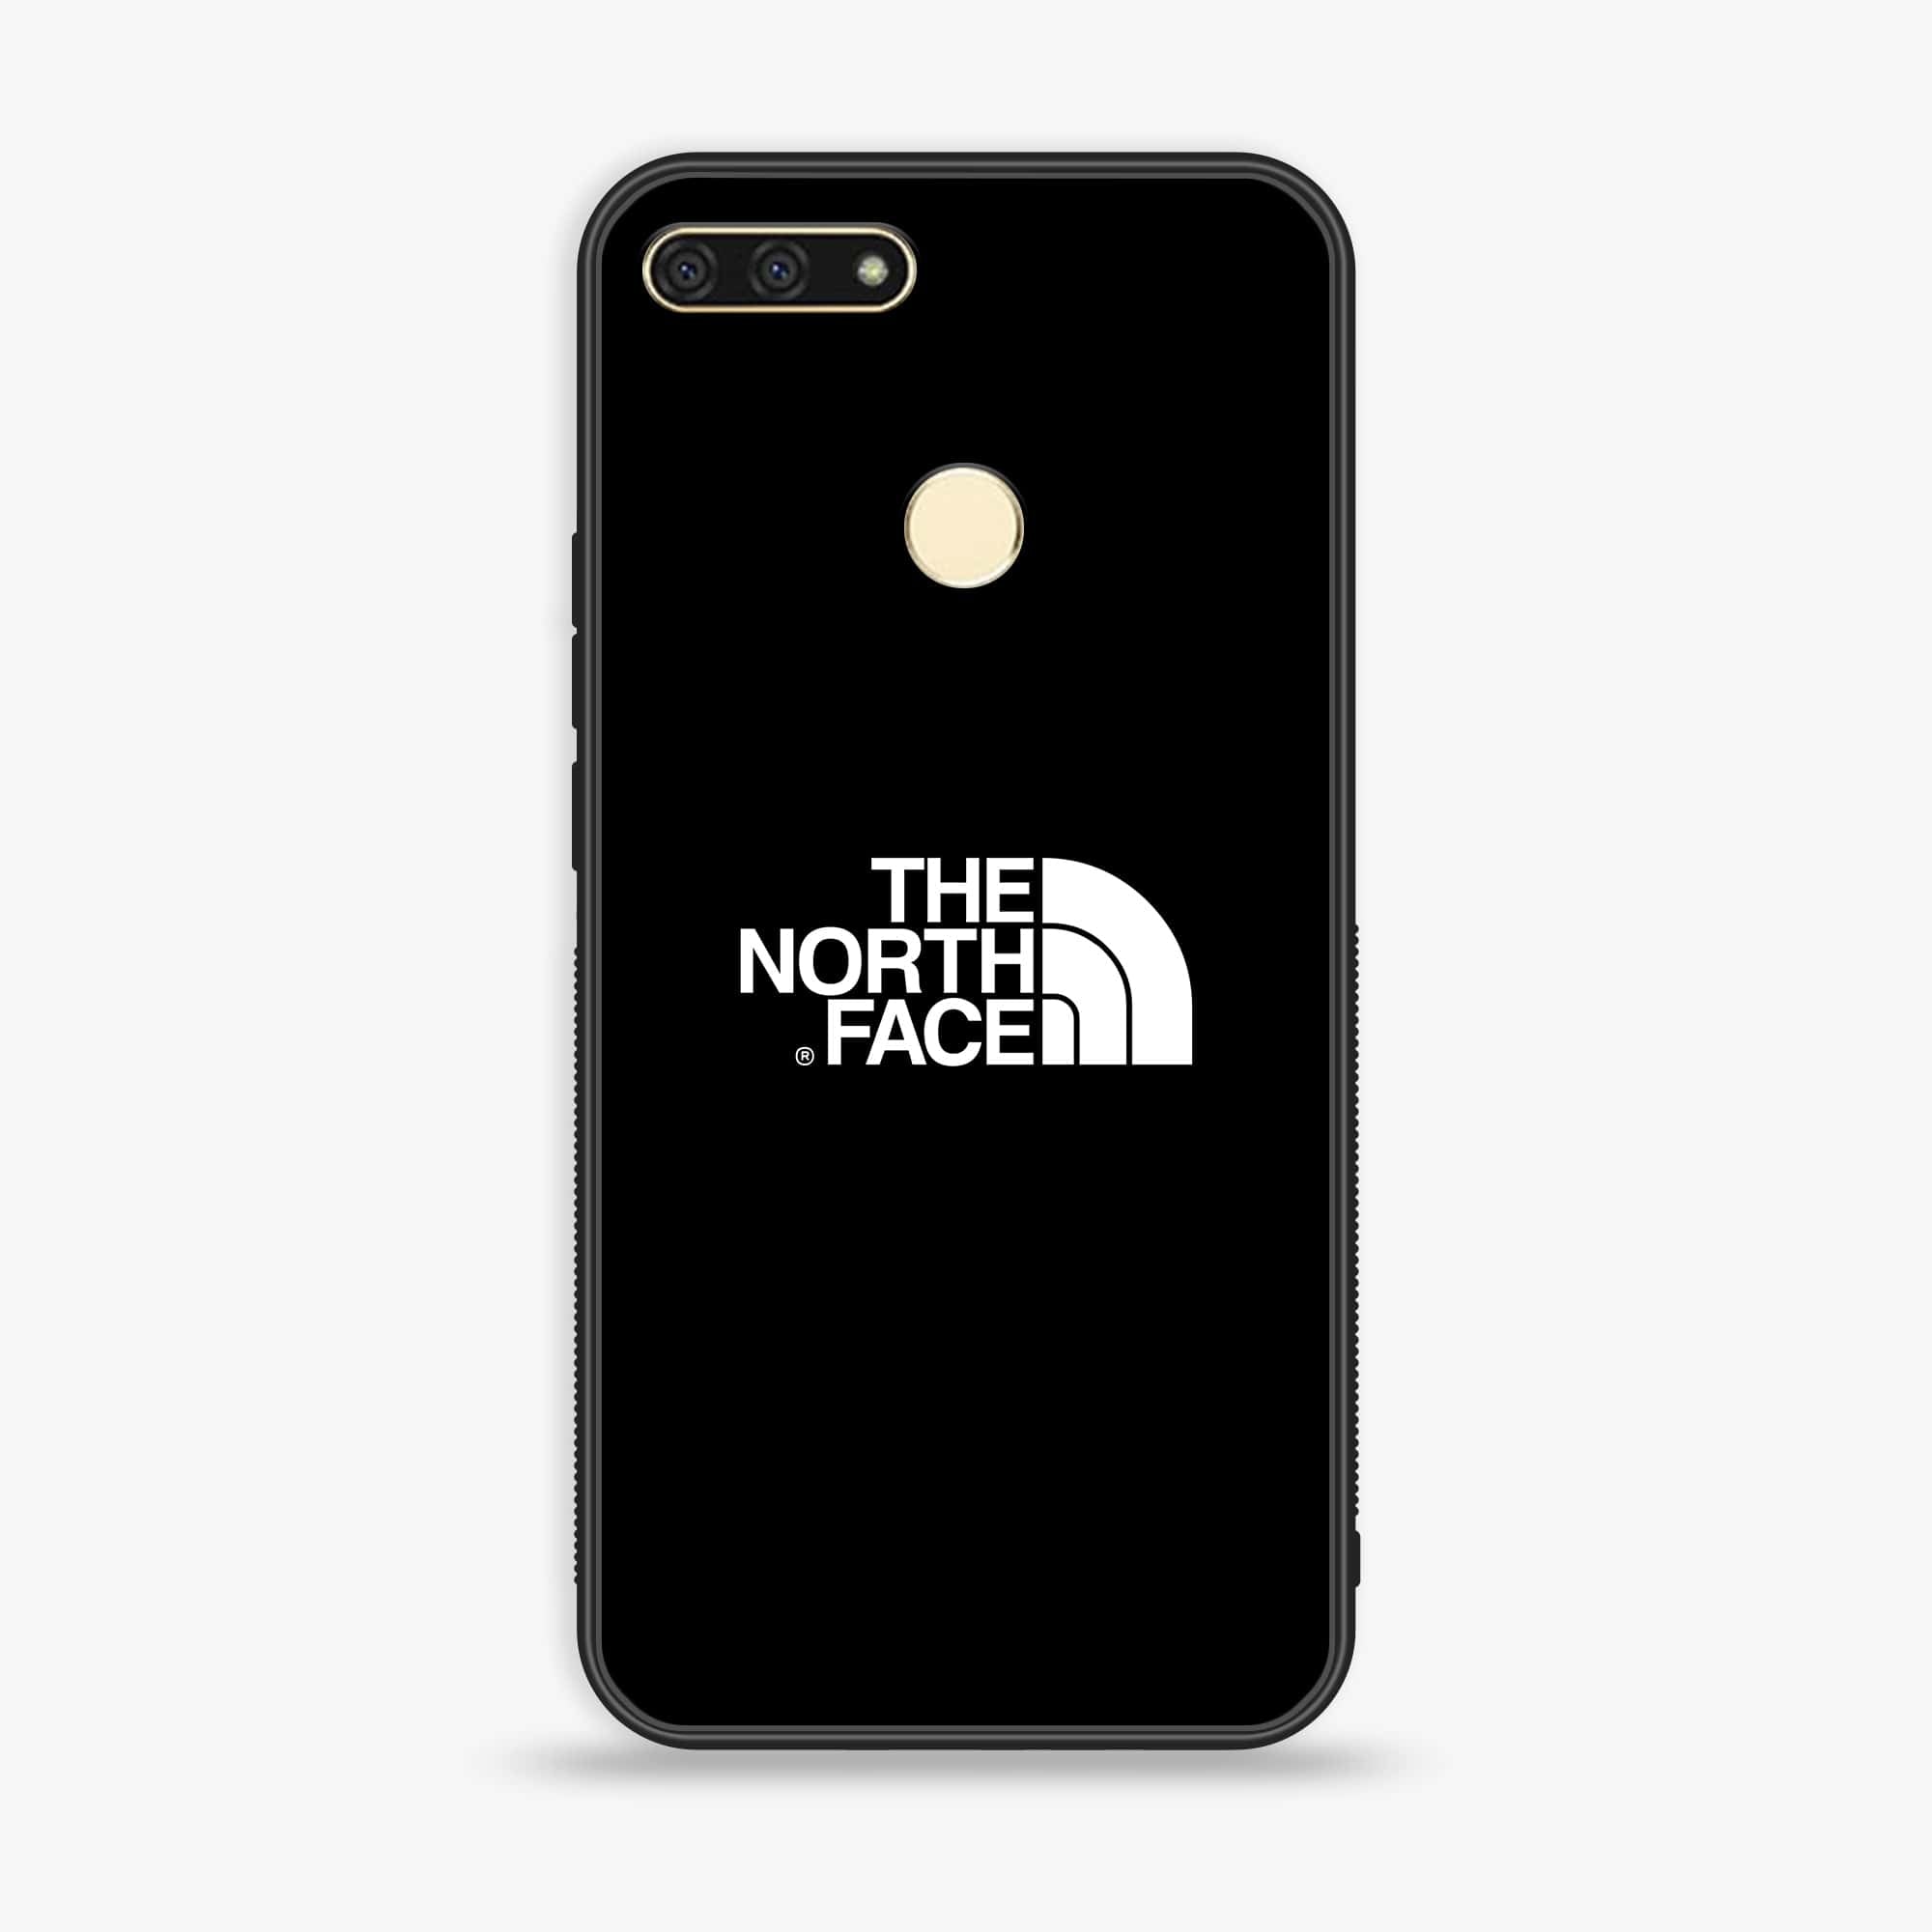 Huawei Y6 2018/Honor Play 7A - The North Face Series - Premium Printed Glass soft Bumper shock Proof Case